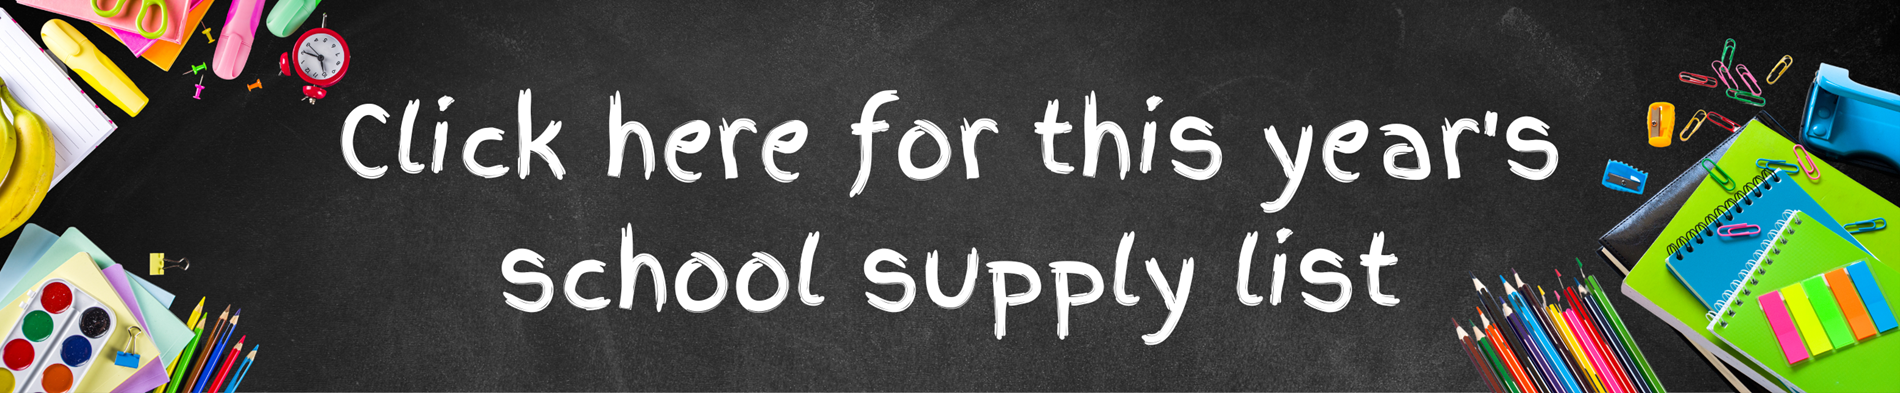 Click here for the school supply list